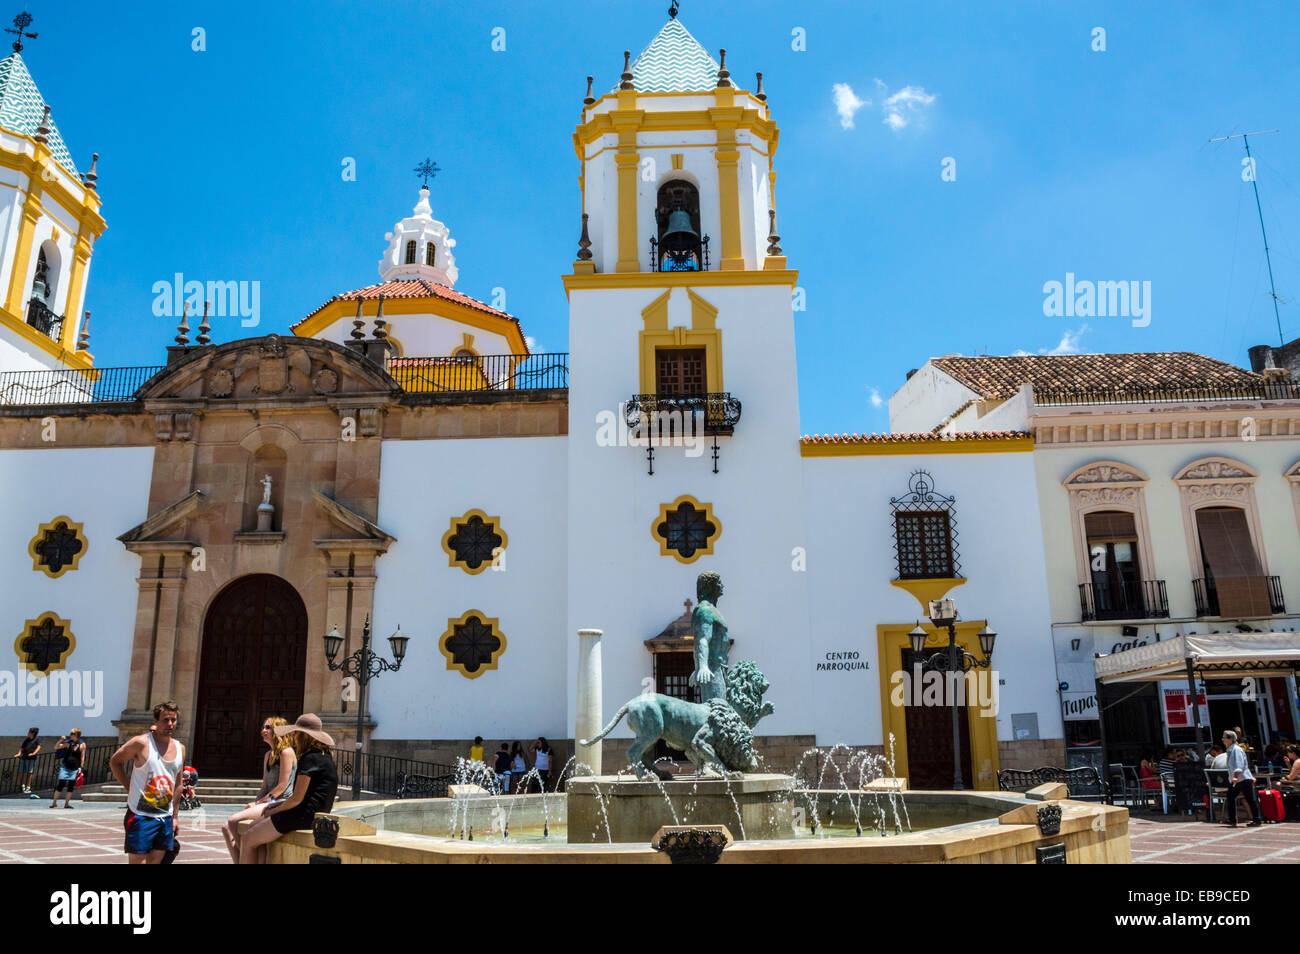 A view of he square in Ronda, Andalucia, Spain Stock Photo